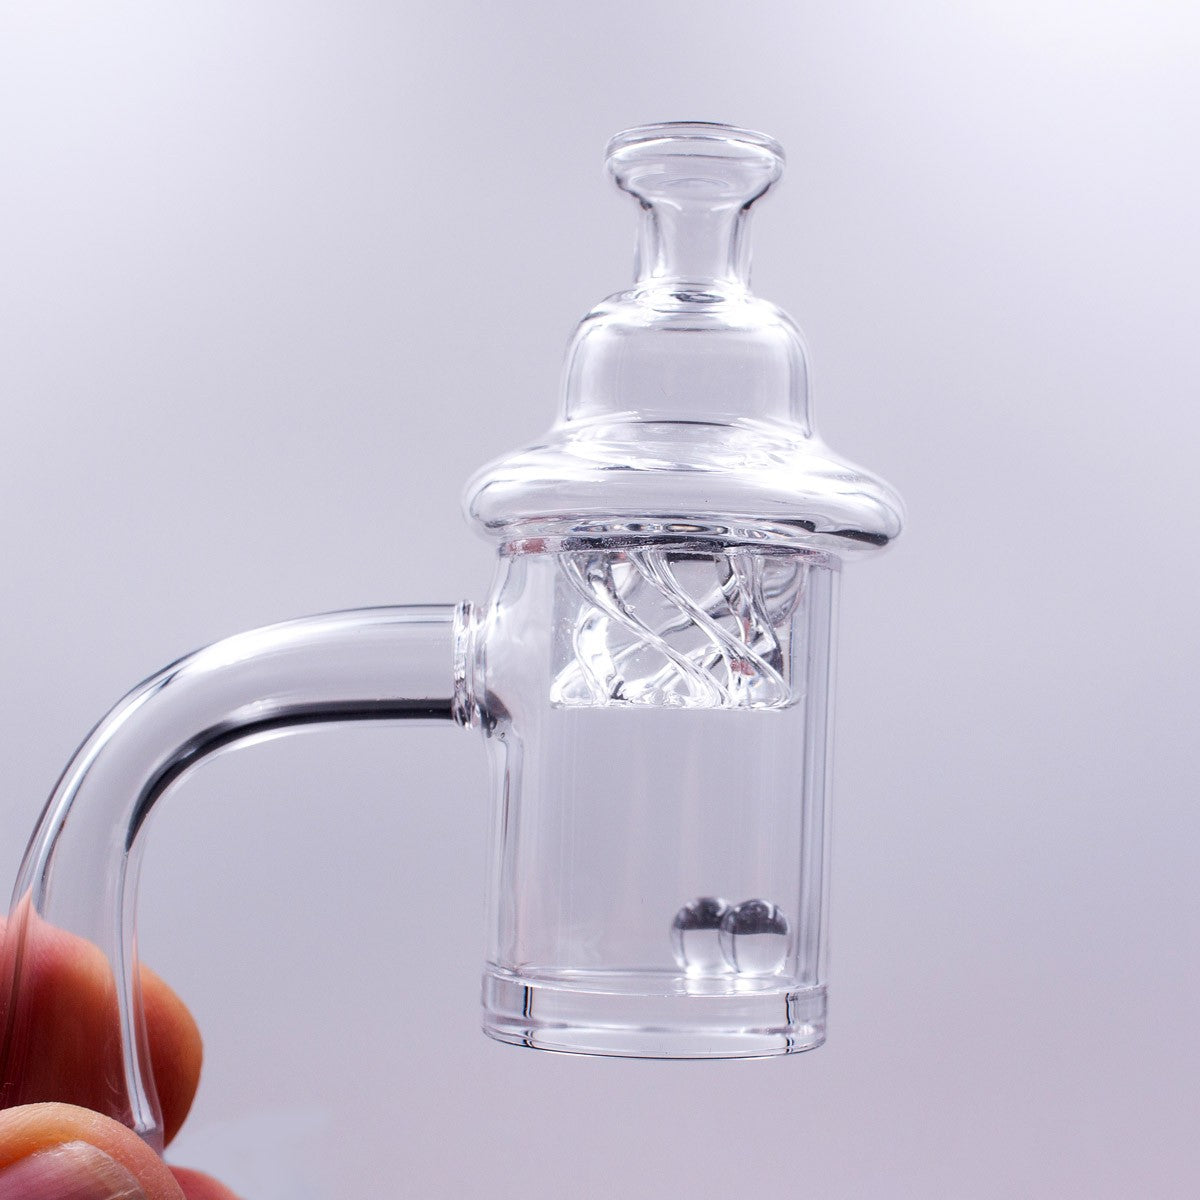 Quartz Banger Kit with Spinning Carb Cap and Terp Pearls by The Stash Shack, angled side view